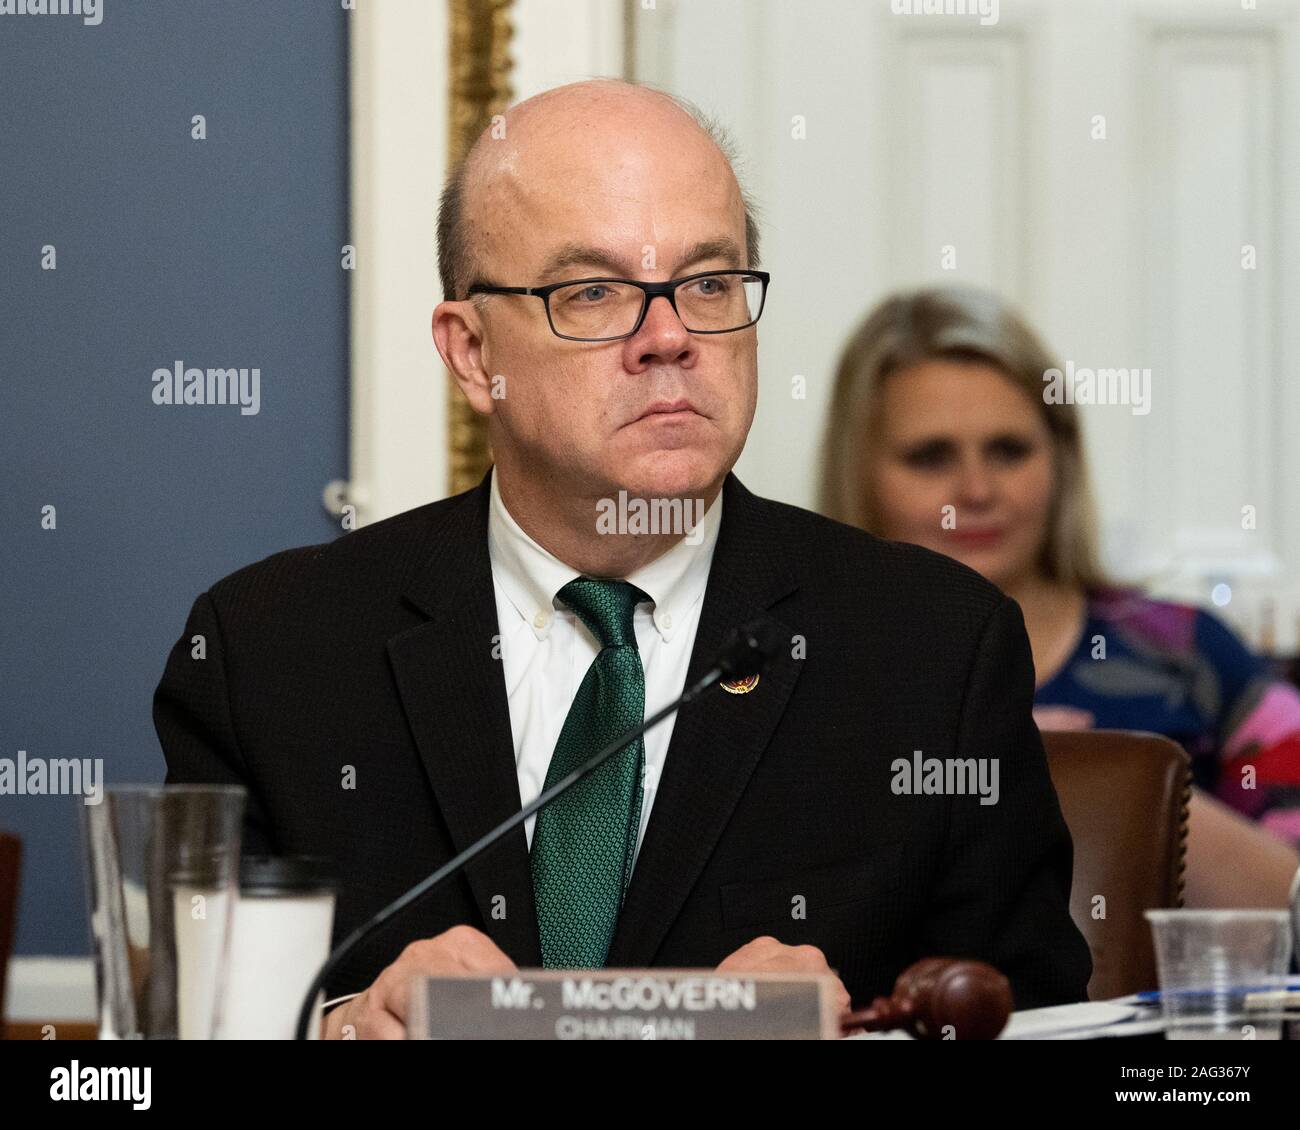 U.S. Representative, Jim McGovern (D-MA) at the House Committee on Rules meeting to discuss H. Res. 755 - Impeaching Donald John Trump, President of the United States, for high crimes and misdemeanors. Stock Photo